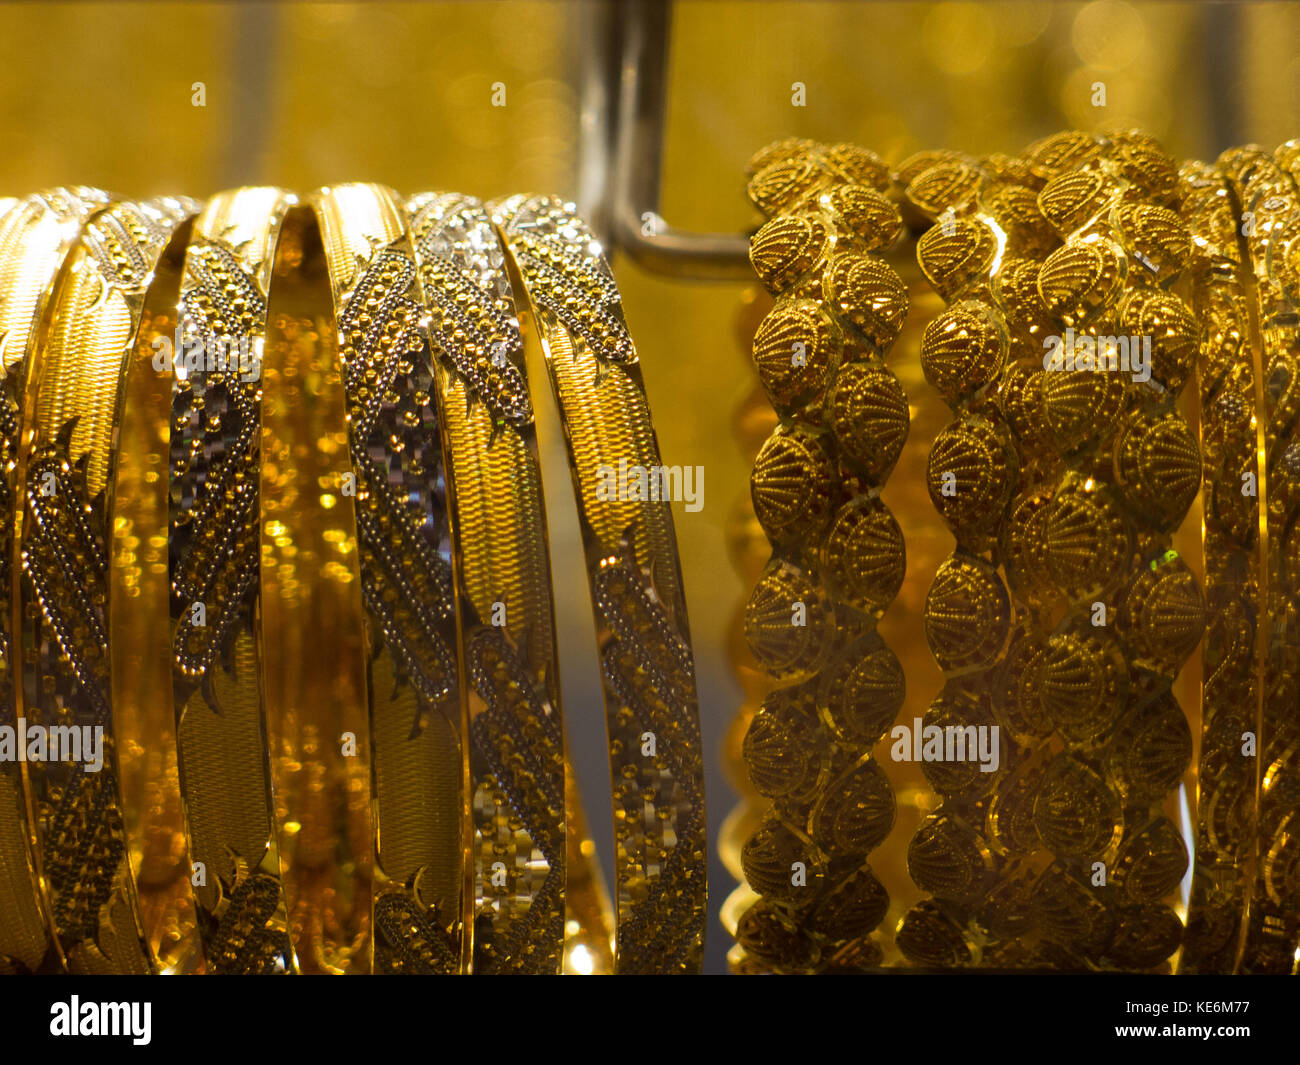 Gold chains shop Stock Photo - Alamy